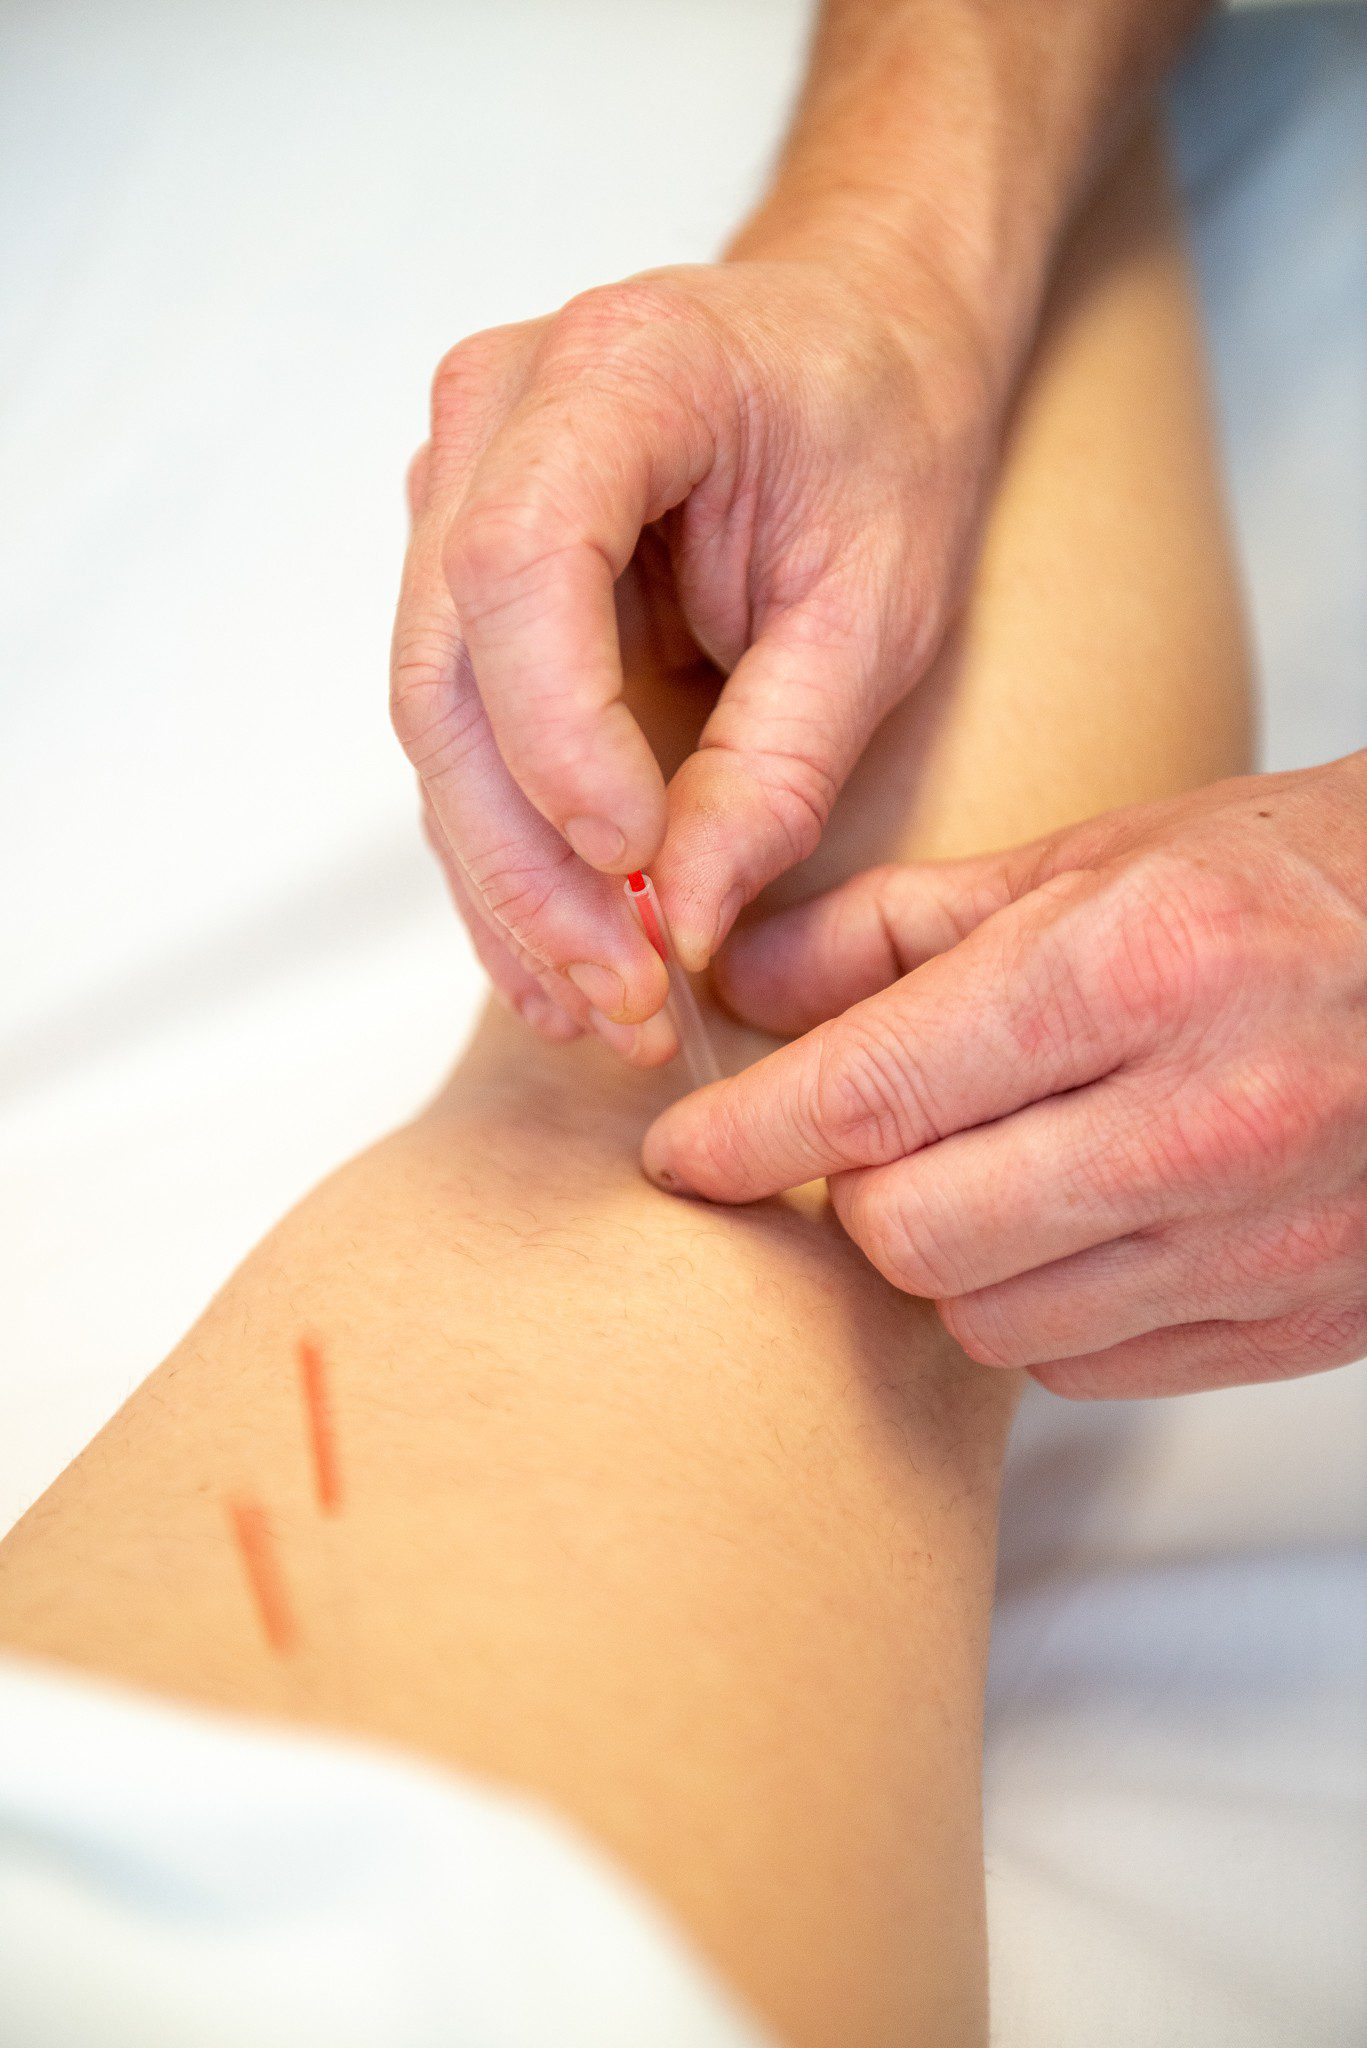 Acupuncture for osteoarthritis of the knee